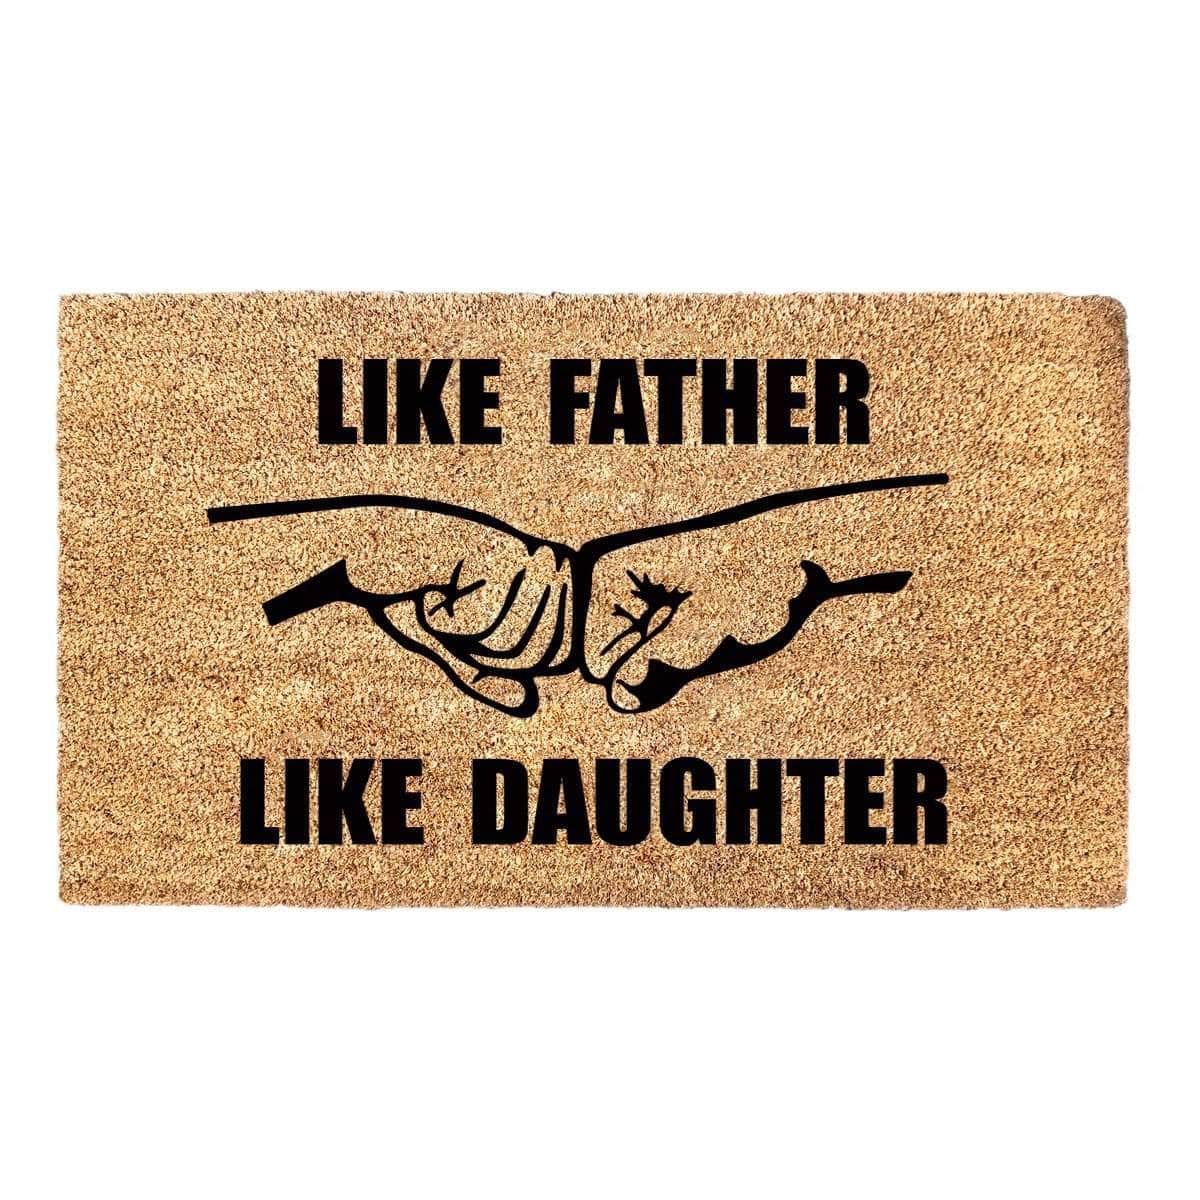 Like Father Like Daughter - Doormat